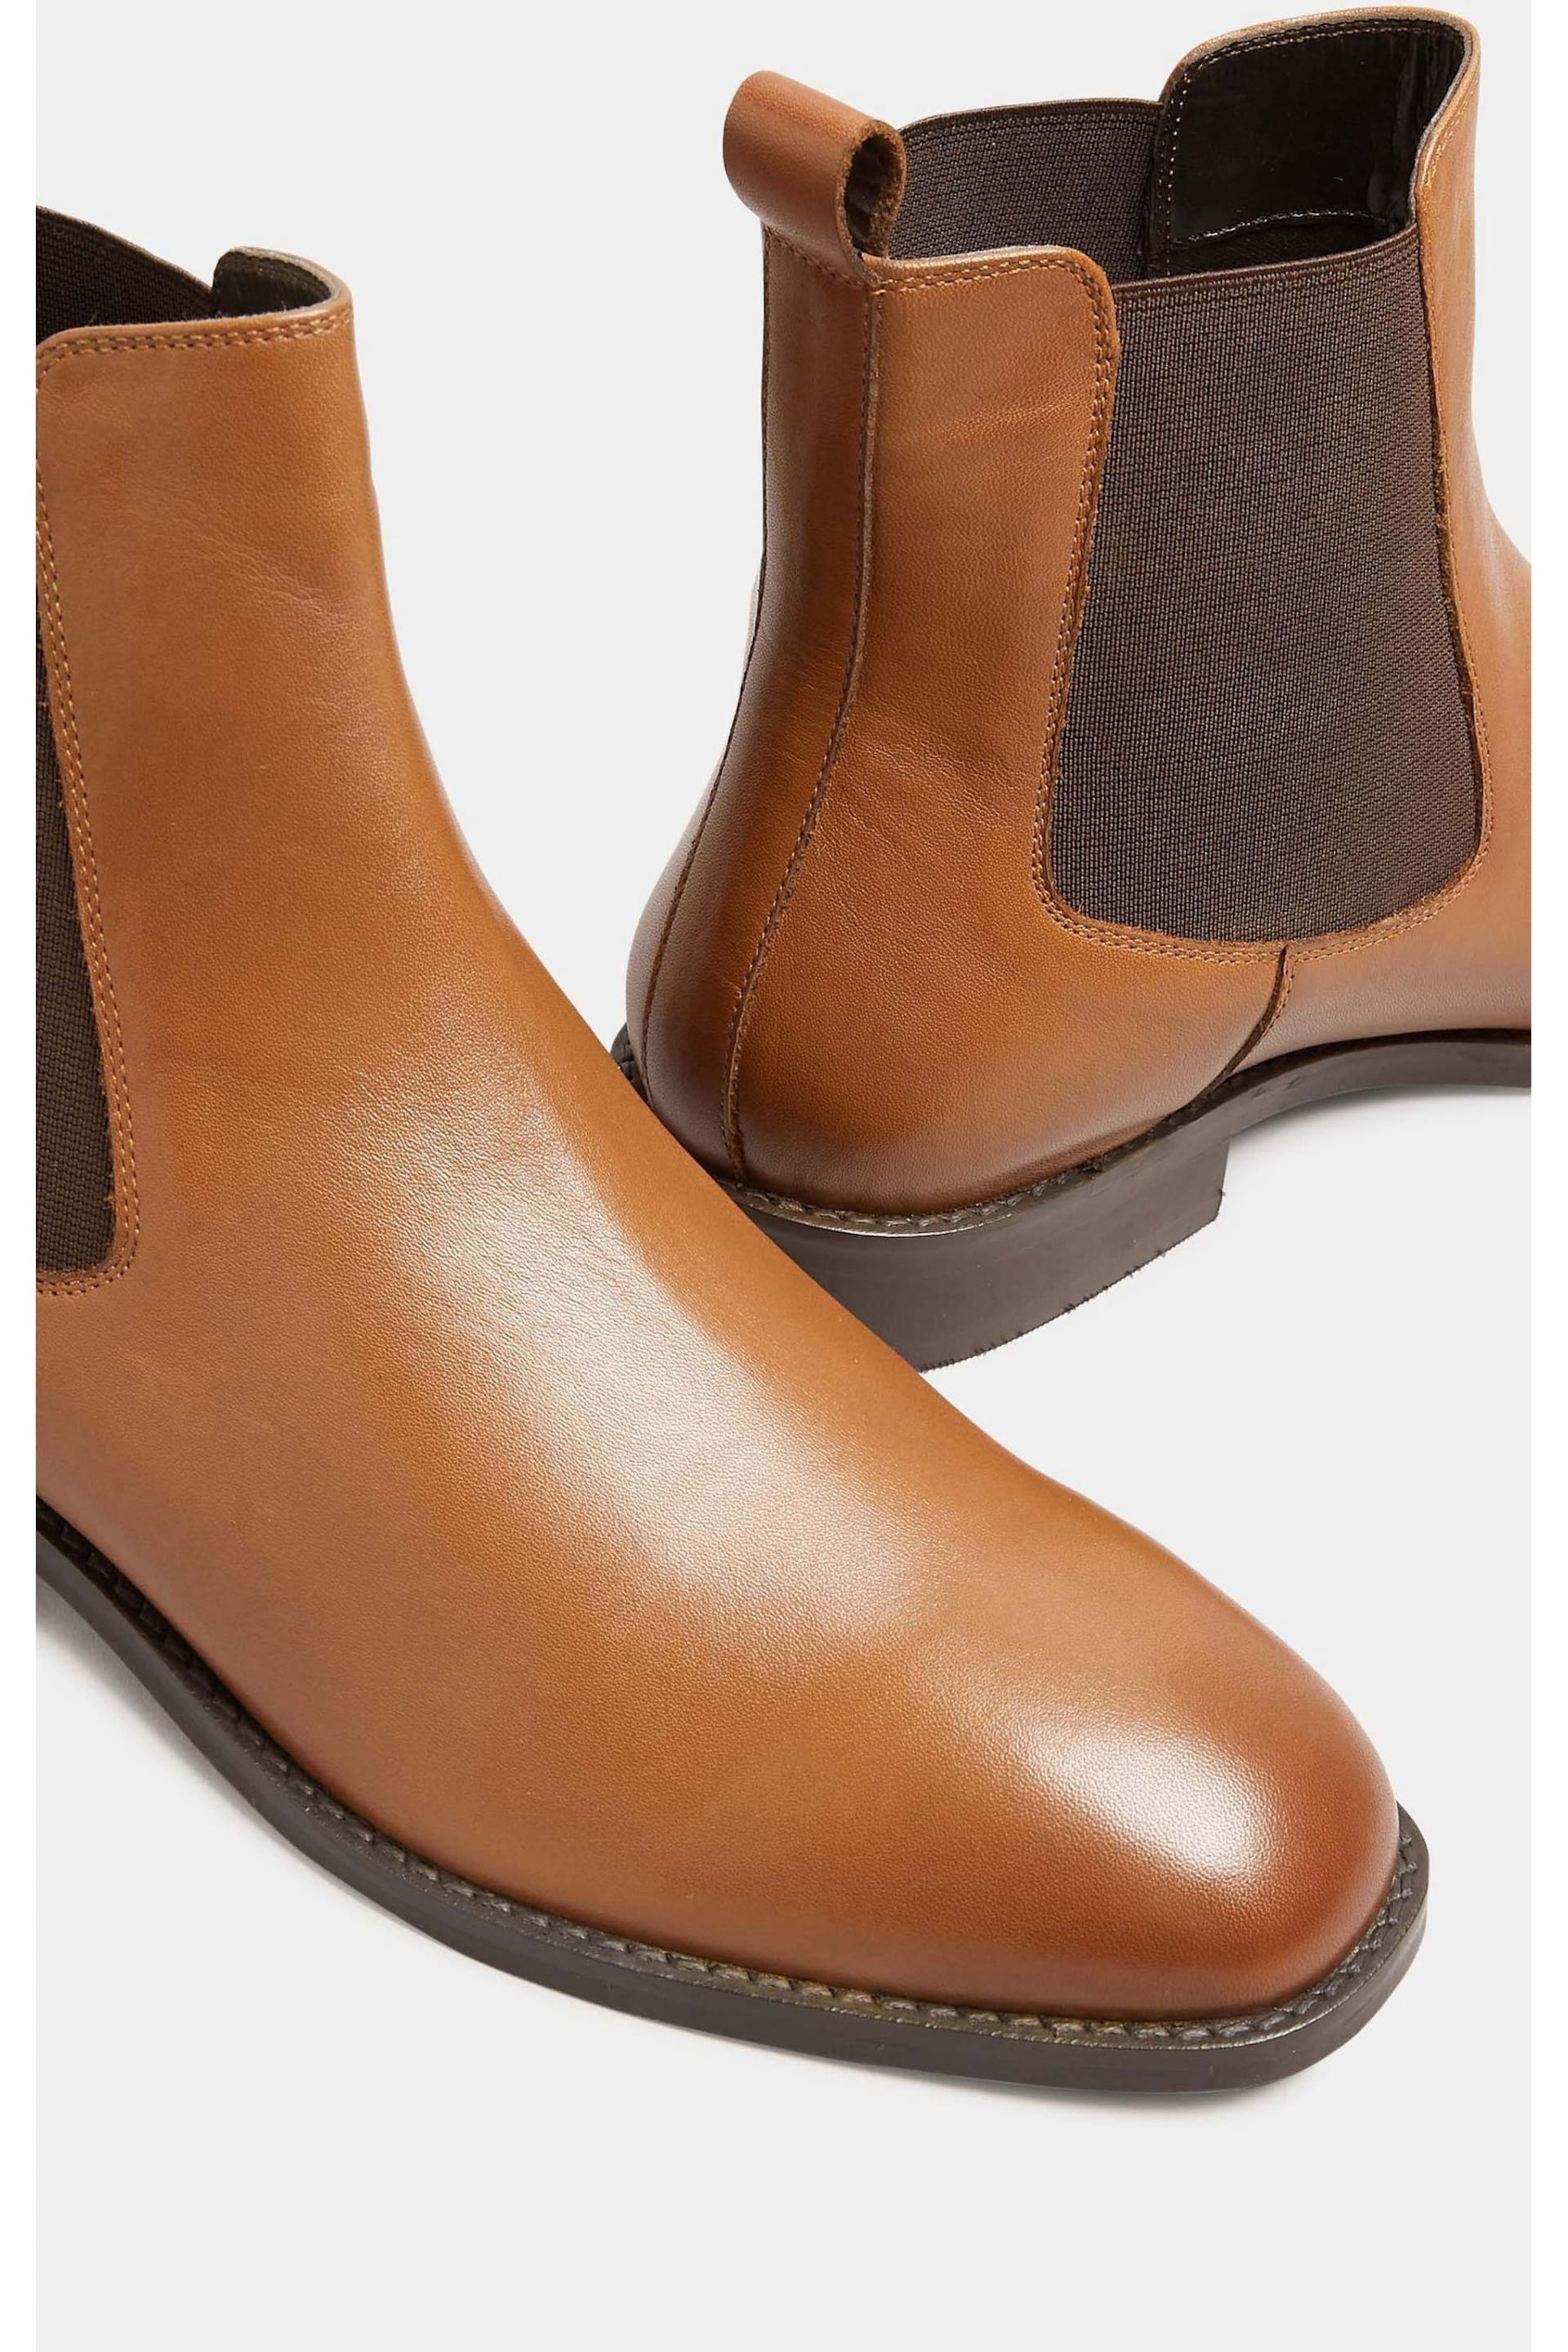 Long Tall Sally Brown Leather Chelsea Boots - Image 4 of 5